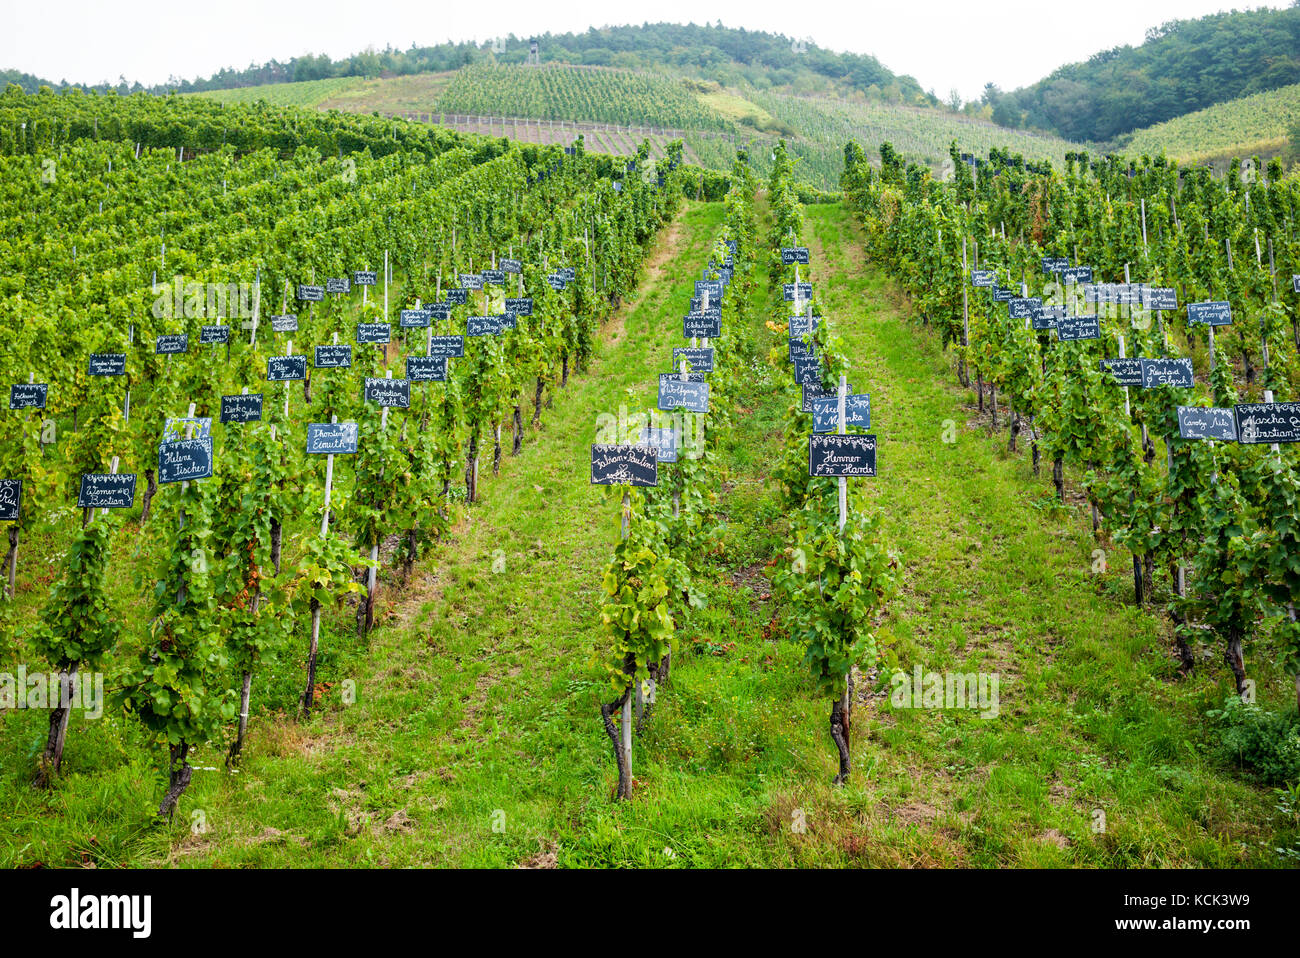 Vines growing in the Moselle Valley, Germany Stock Photo